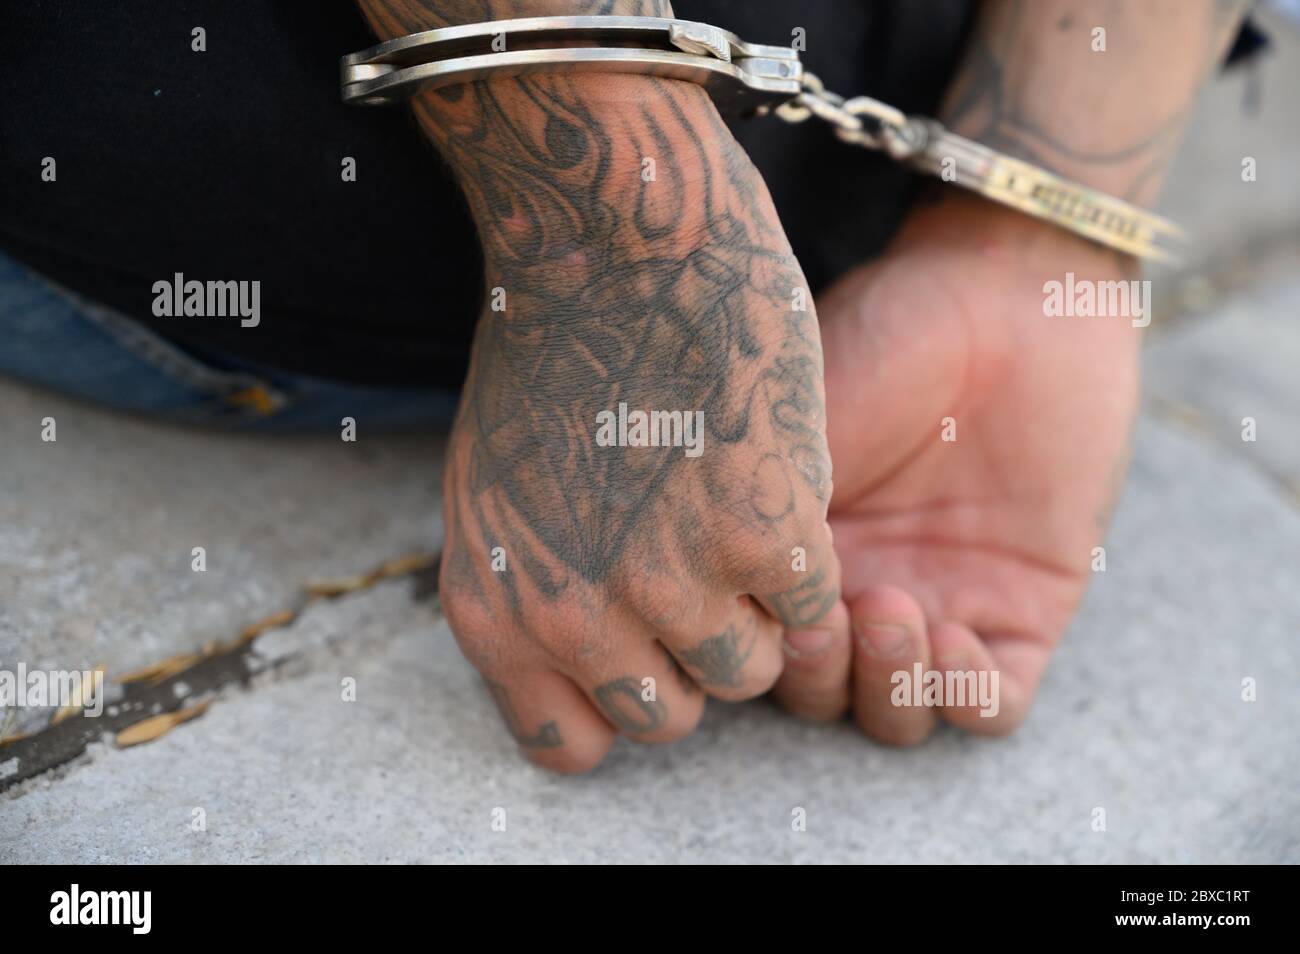 U.S. Marshals and local police handcuff a suspect wanted for violent offenses during the 90-day, multi-state Operation Triple Beam May 26, 2019 in St Louis, Missouri. The operation resulted in more than 6,000 arrests in violence-plagued communities. Stock Photo